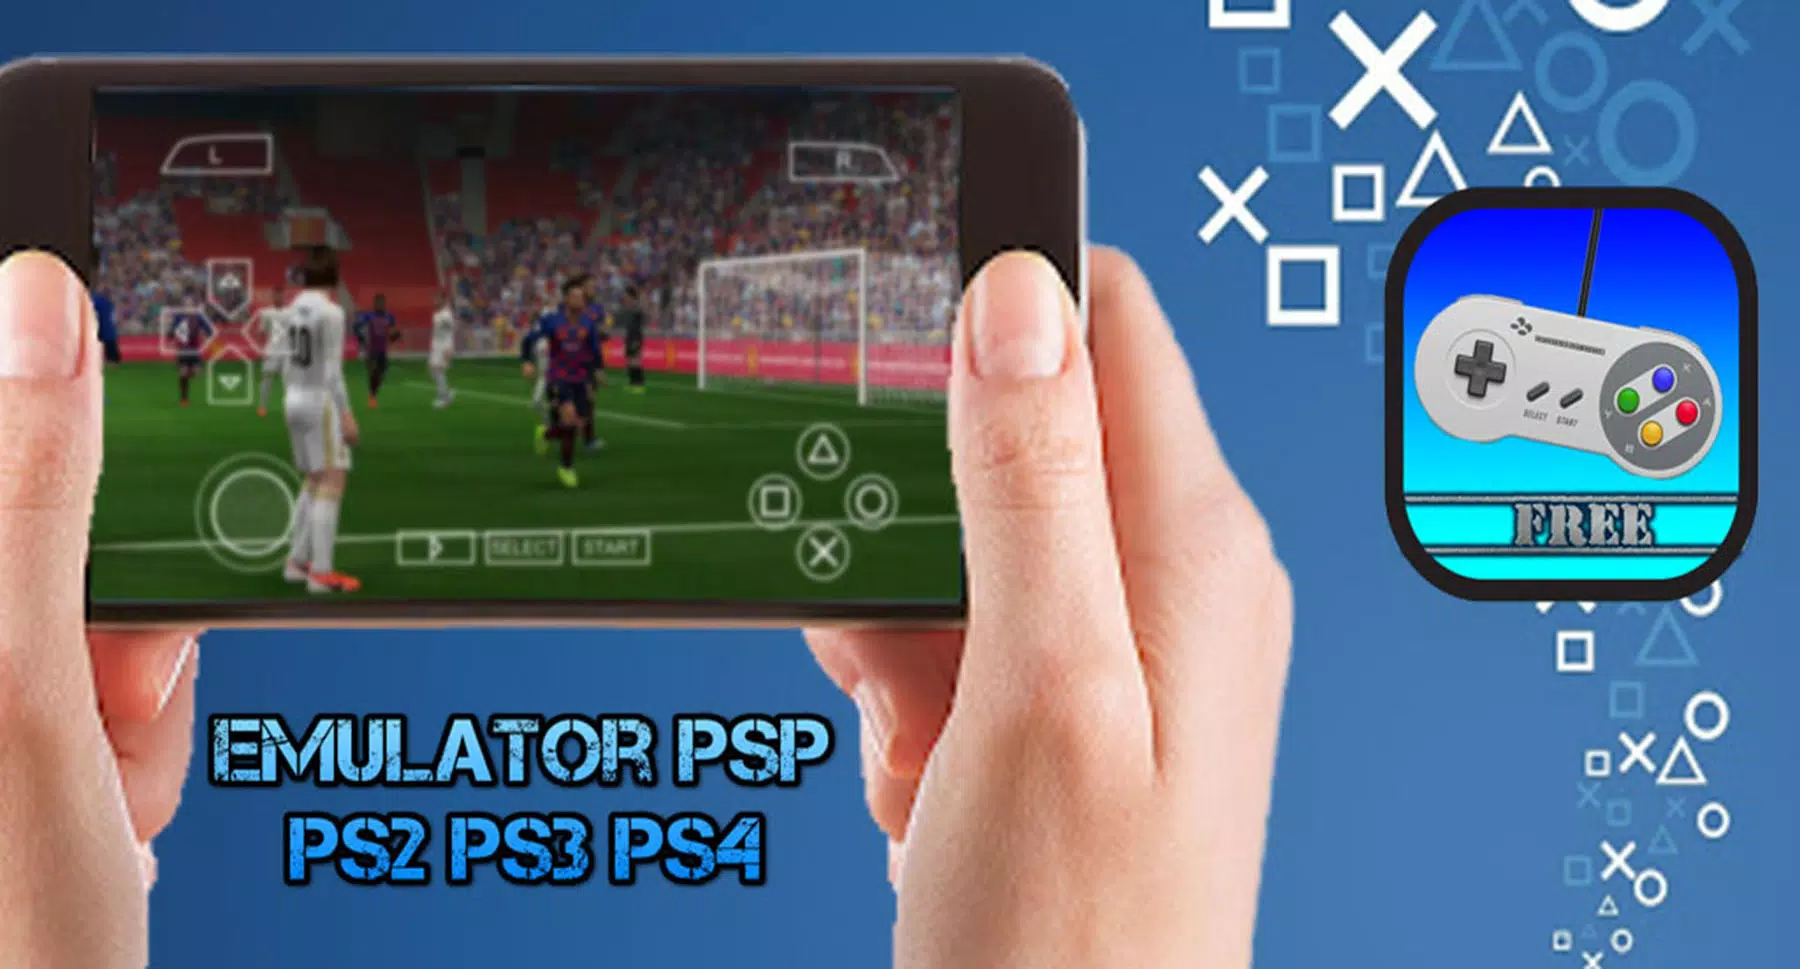 DOWNLOAD & PLAY : Emulator PSP PS2 PS3 PS4 Free for Android - APK Download